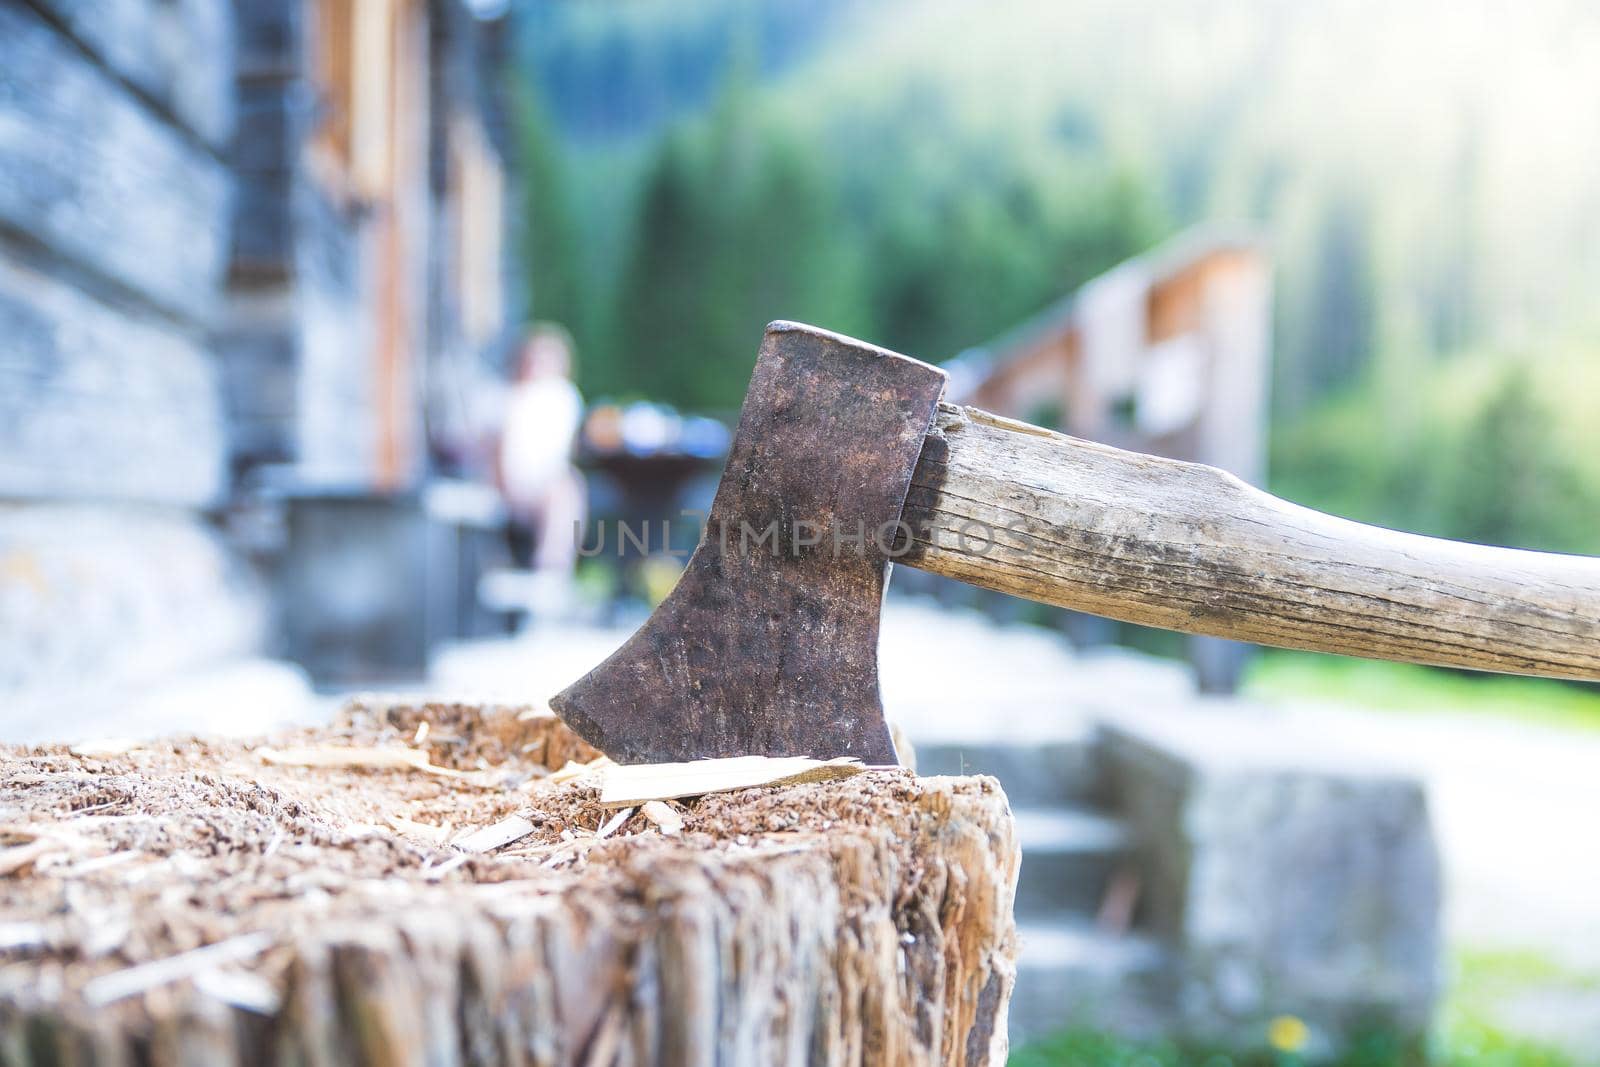 Getting wood for fire: axe attached to a tree trunk by Daxenbichler